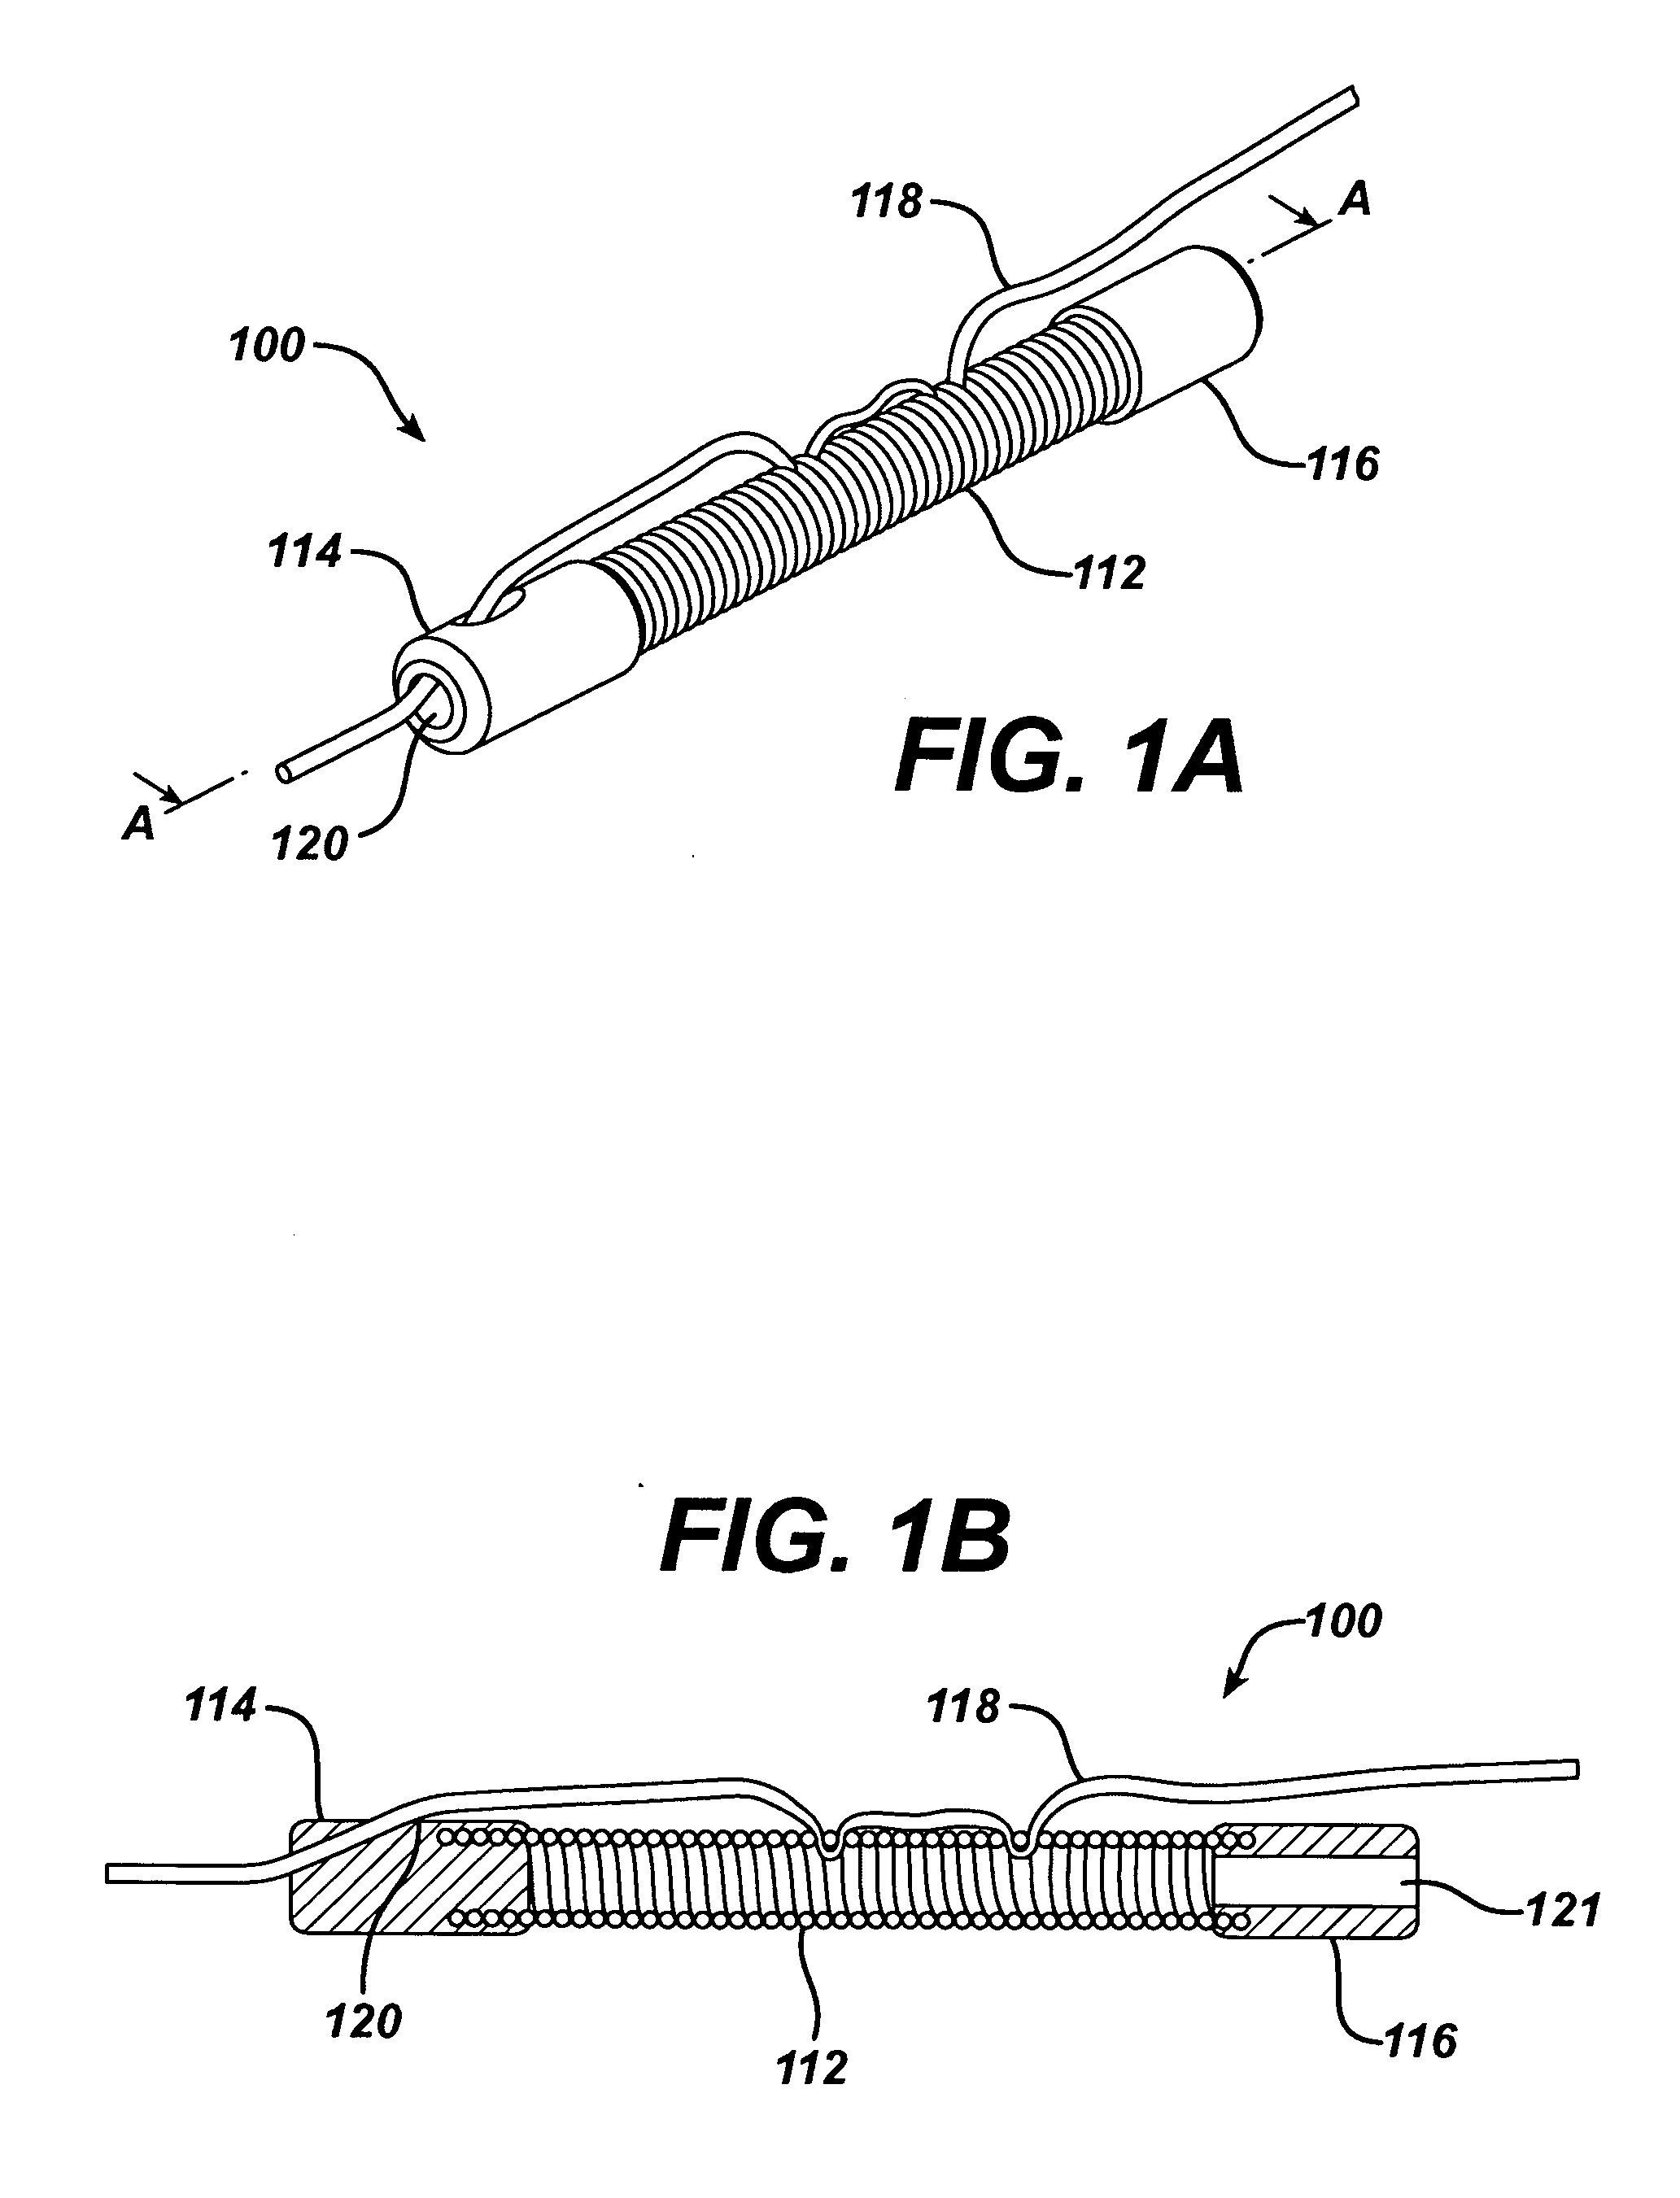 Devices for locking and/or cutting a suture